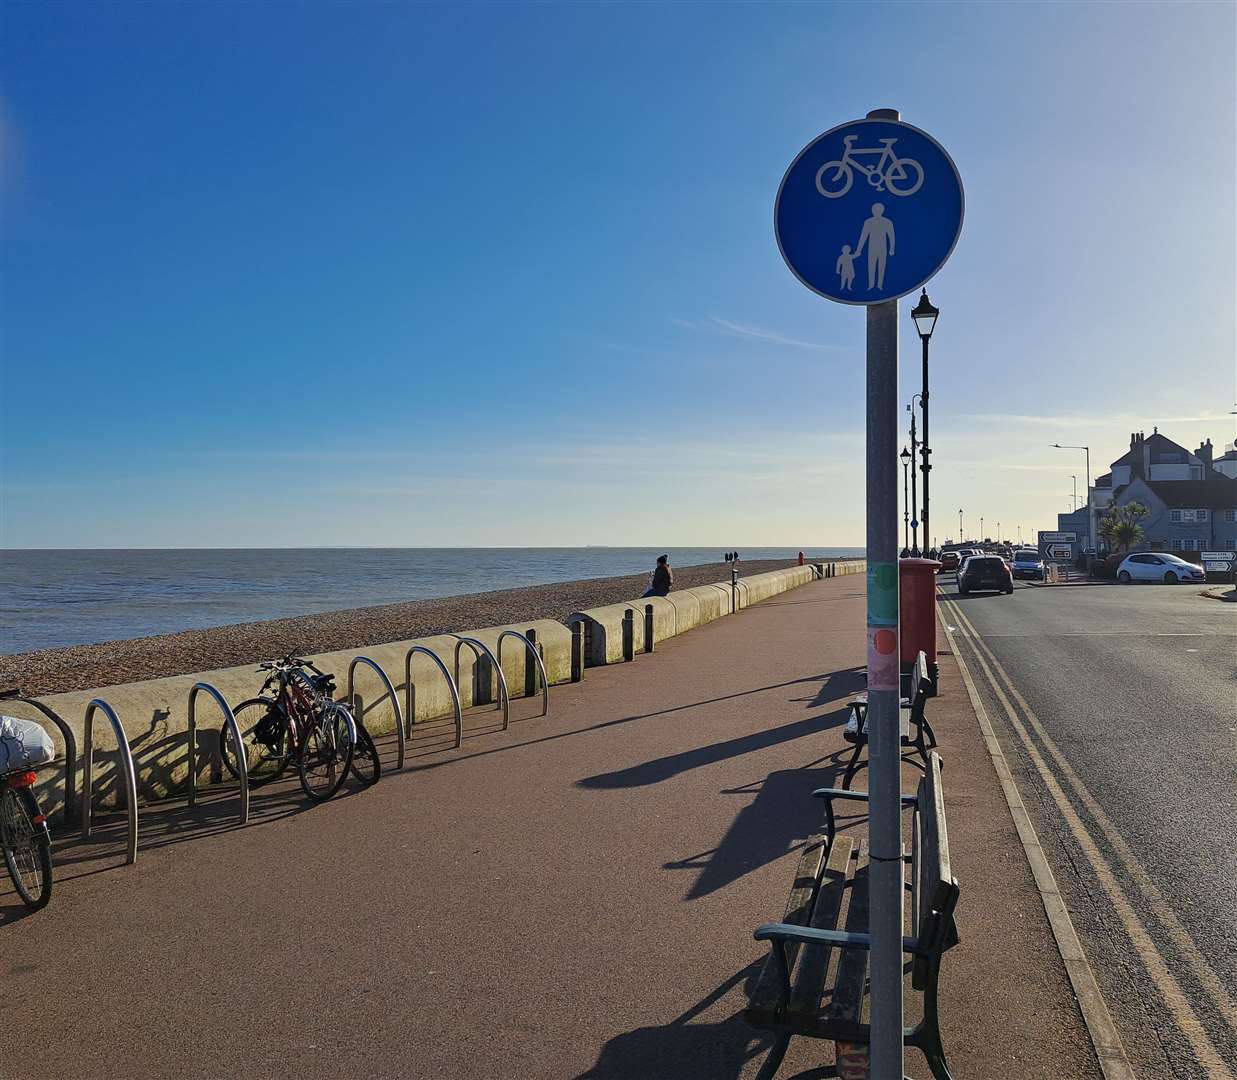 The current signage on the shared space section of Deal seafront